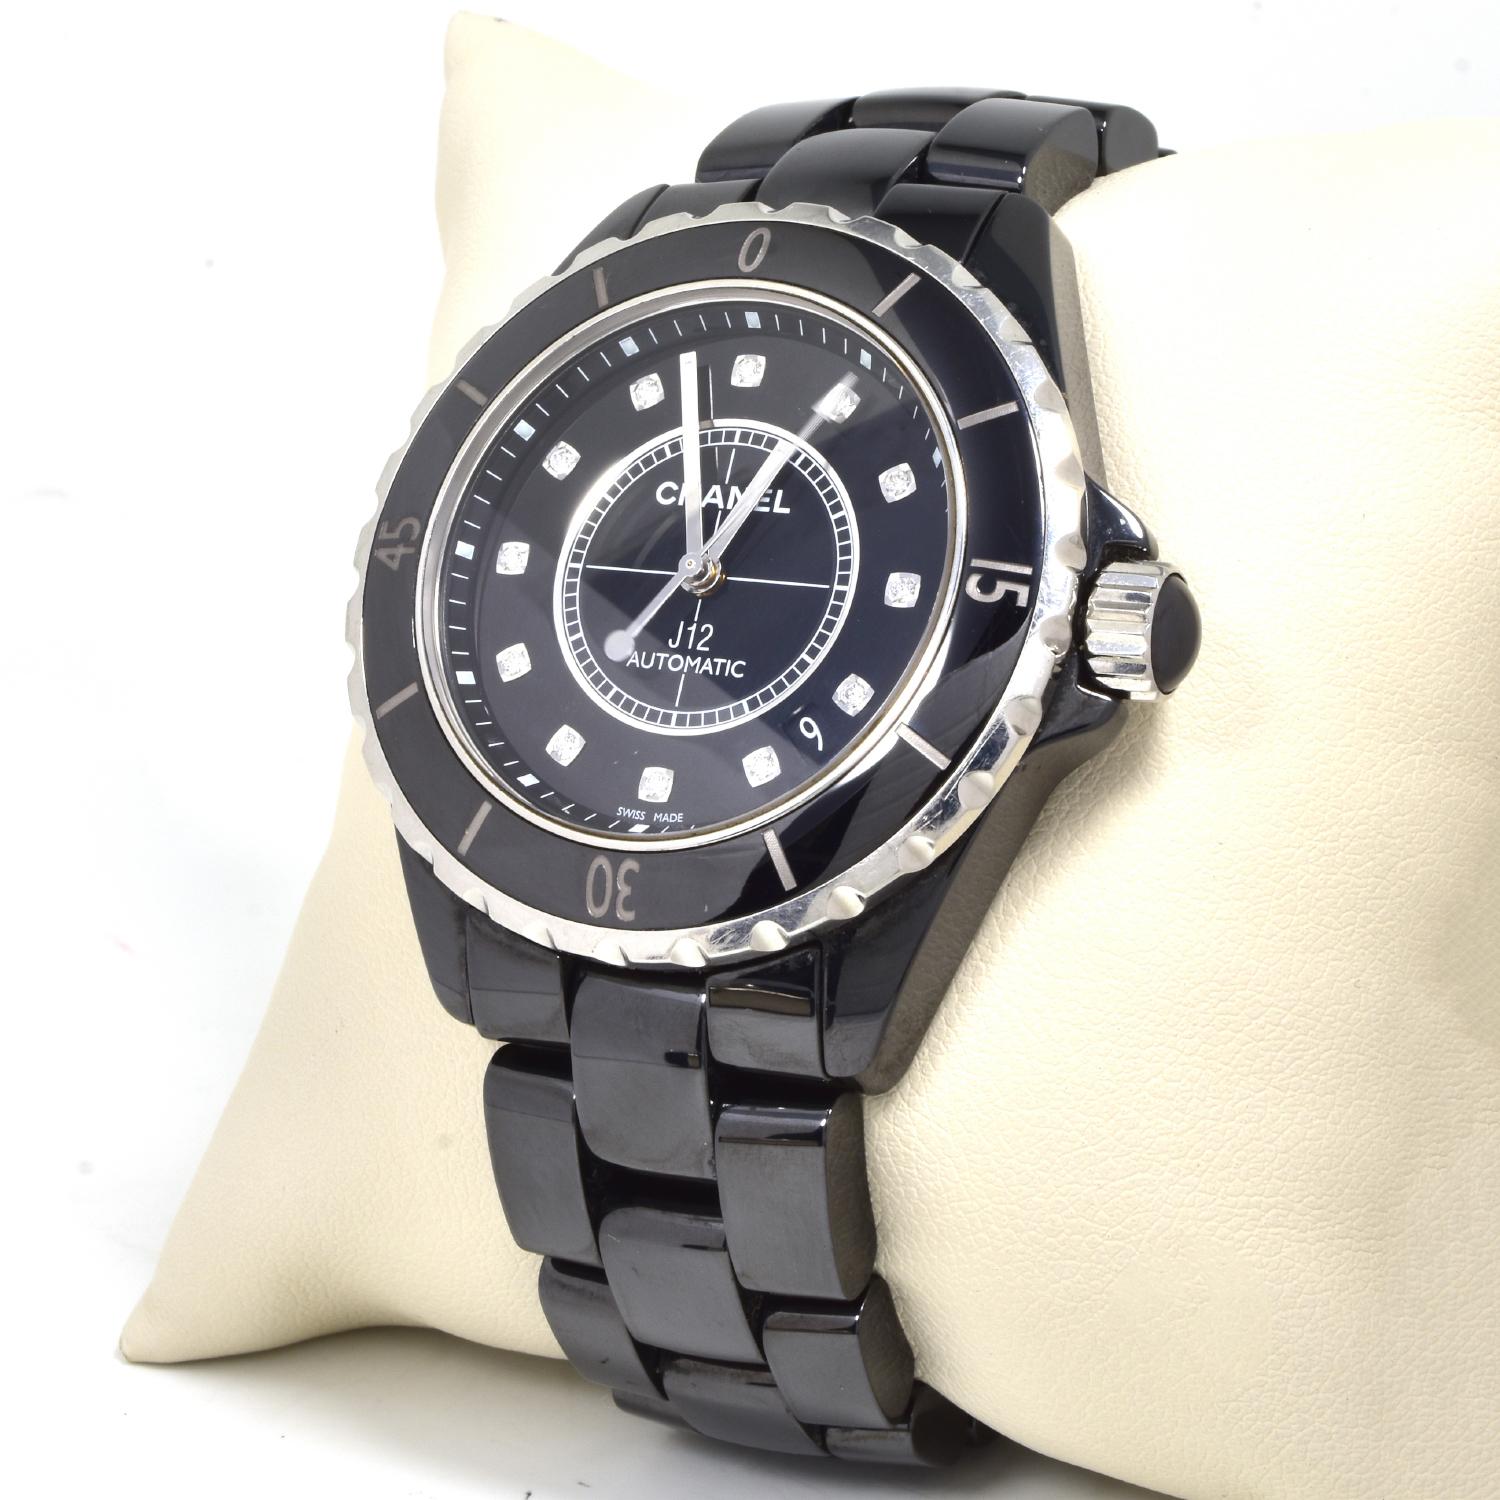 Brand: Chanel

Model: J12

Reference Number: 47032

Case Material: Black Ceramic

Dial: Diamond Hour Markers

Movement: Automatic

Weight:  135 grams

Bracelet size: 17.8 cm

Accessories:

Brilliance Jewels Two-year Warranty

Brilliance Jewels